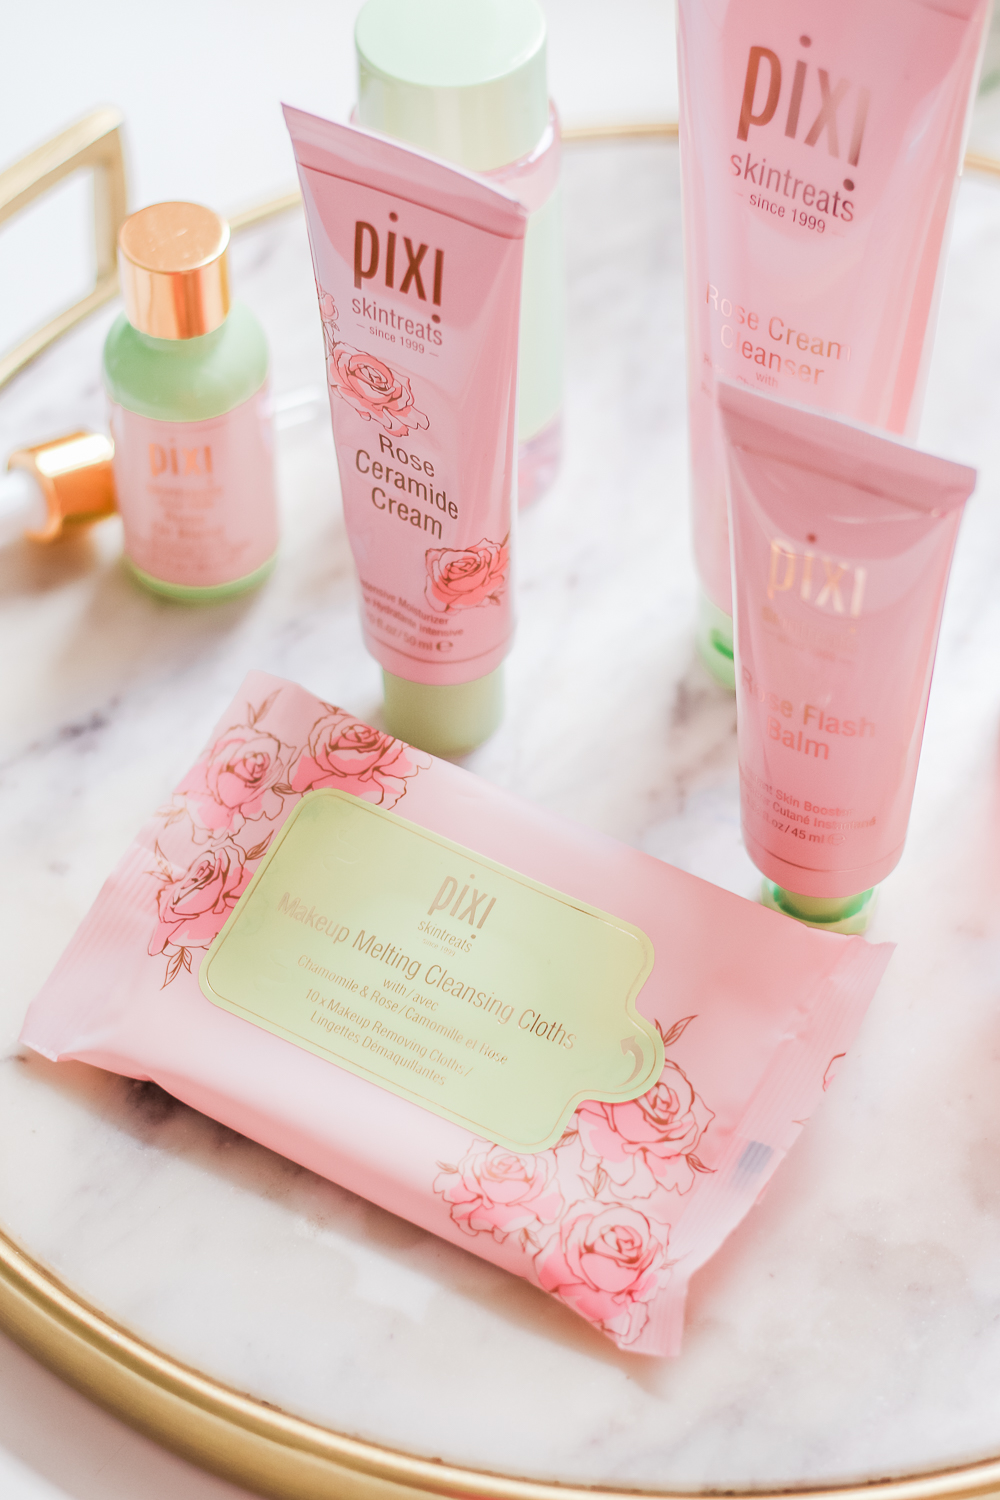 Rose-Infused Skincare Picks: Best Pixi Products for Dry Sensitive Skin by drugstore beauty blogger Stephanie Ziajka from Diary of a Debutante, best of Pixi rose infused skincare, pixi rose infused skintreats, best pixi skincare products, pixi rose oil blend review, pixi by petra rose oil blend, pixi products review, pixi rose cream cleanser review, pixi rose ceramid cream review, pixi rose caviar essence review, pixi rose flash balm review, pixi makeup melting cleansing cloths review, pixi rose glow mist review